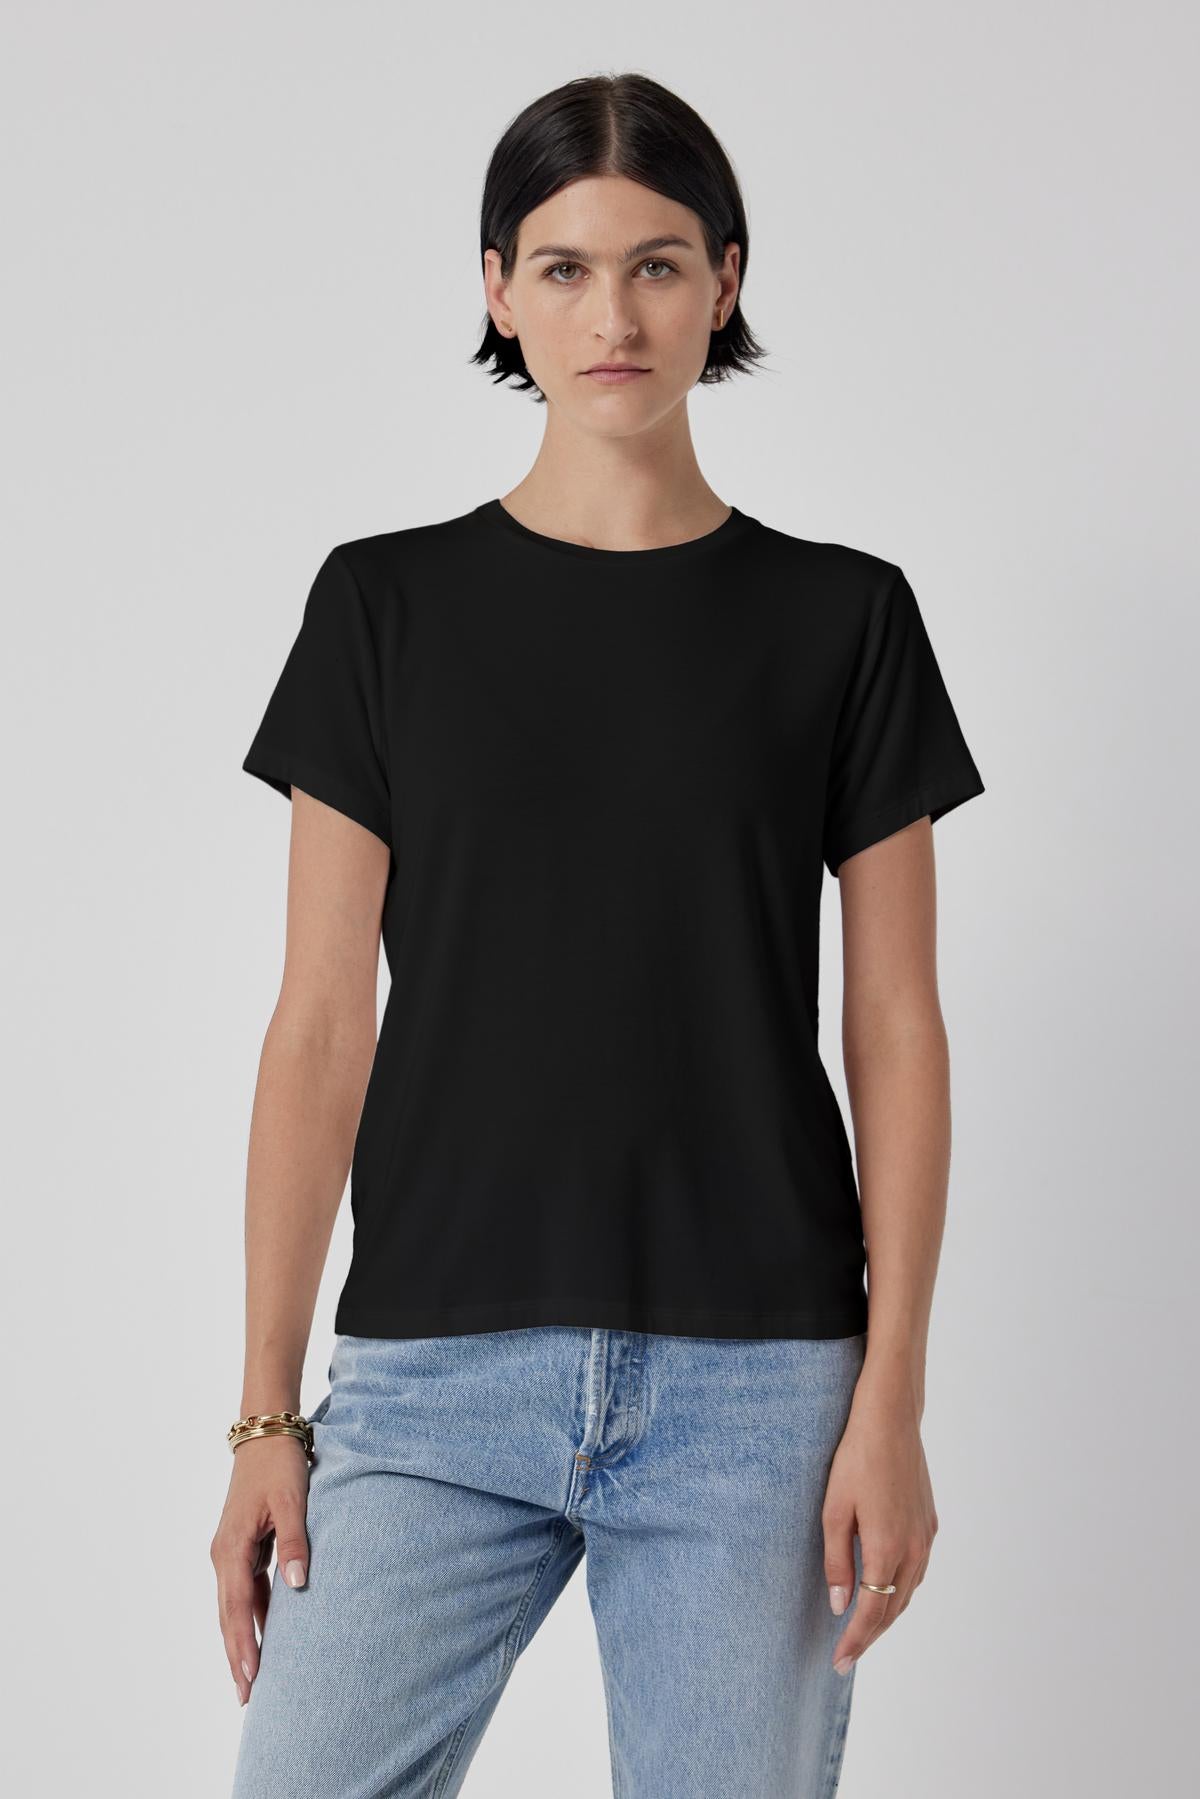 Woman in a classic Velvet by Jenny Graham SOLANA TEE and blue jeans standing against a plain background.-36463663972545